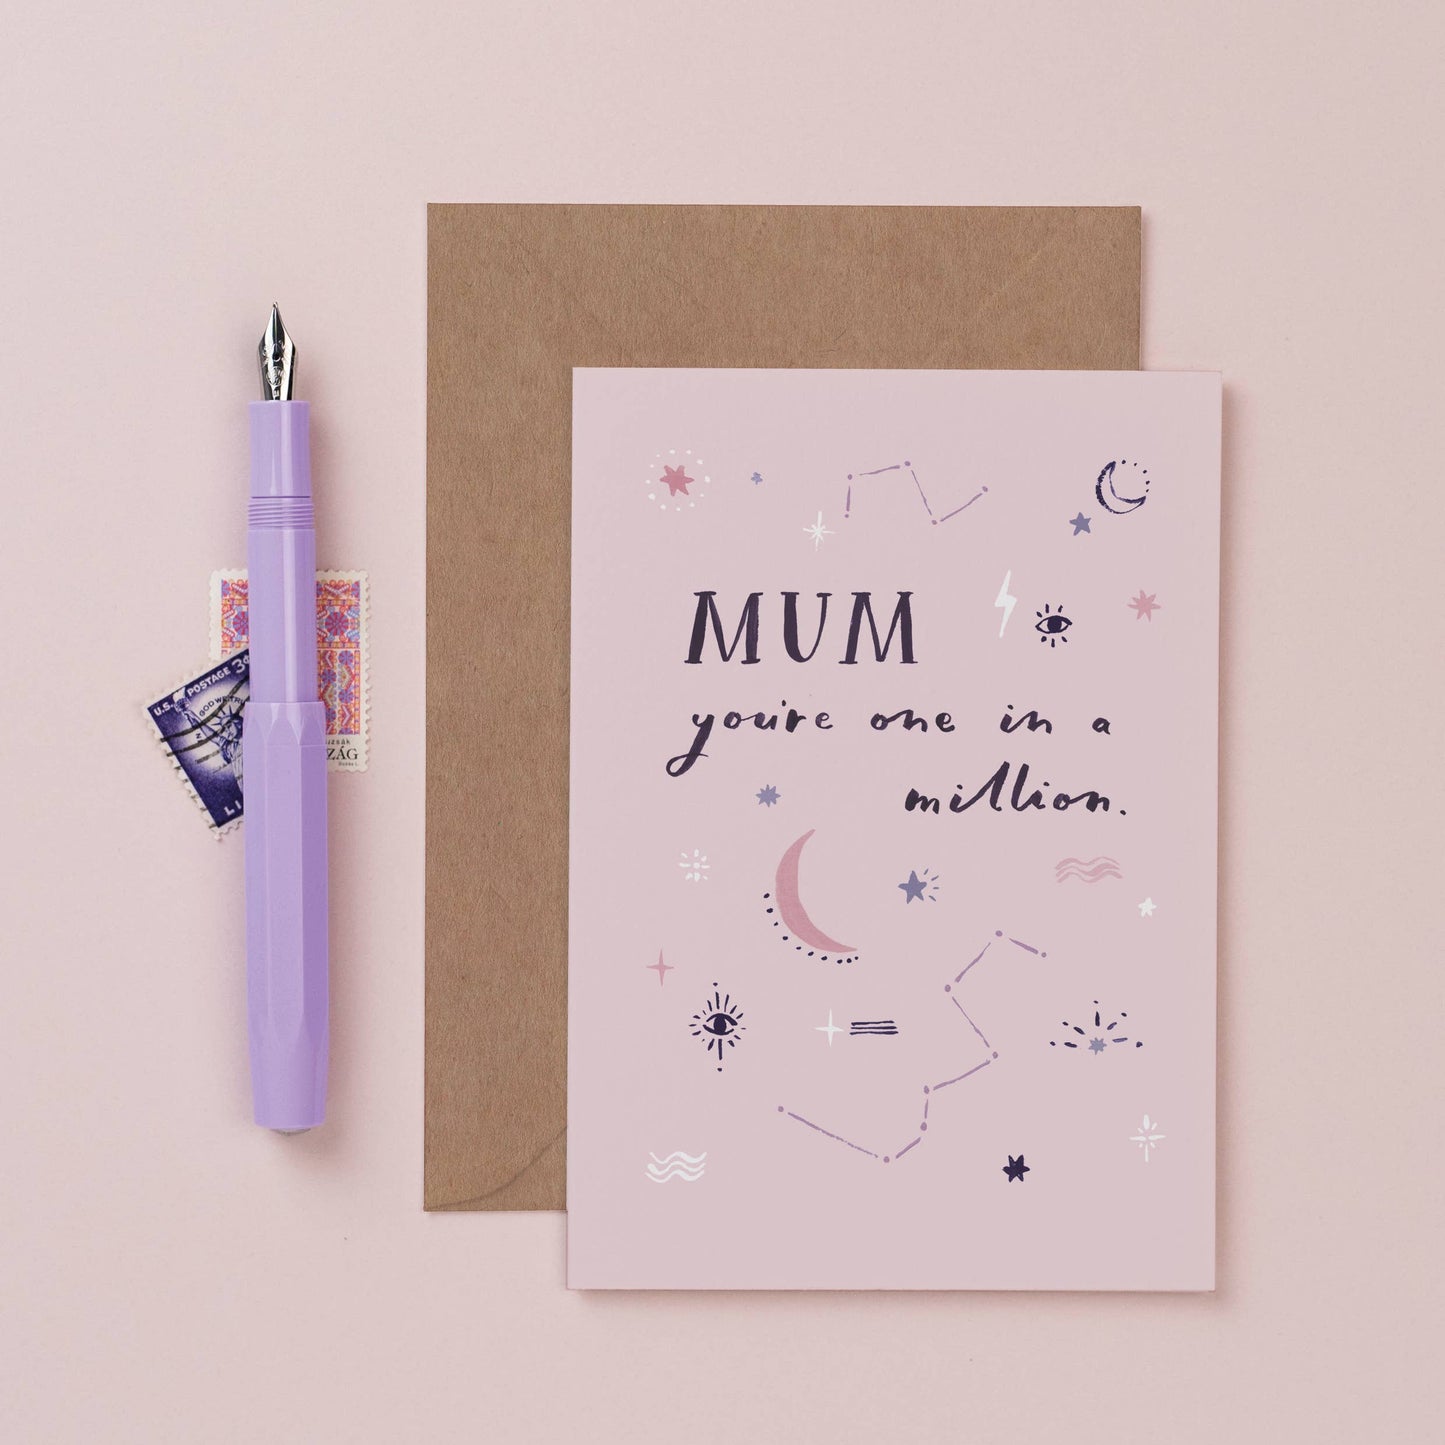 Mum in a Million Card By Sister Paper Co.